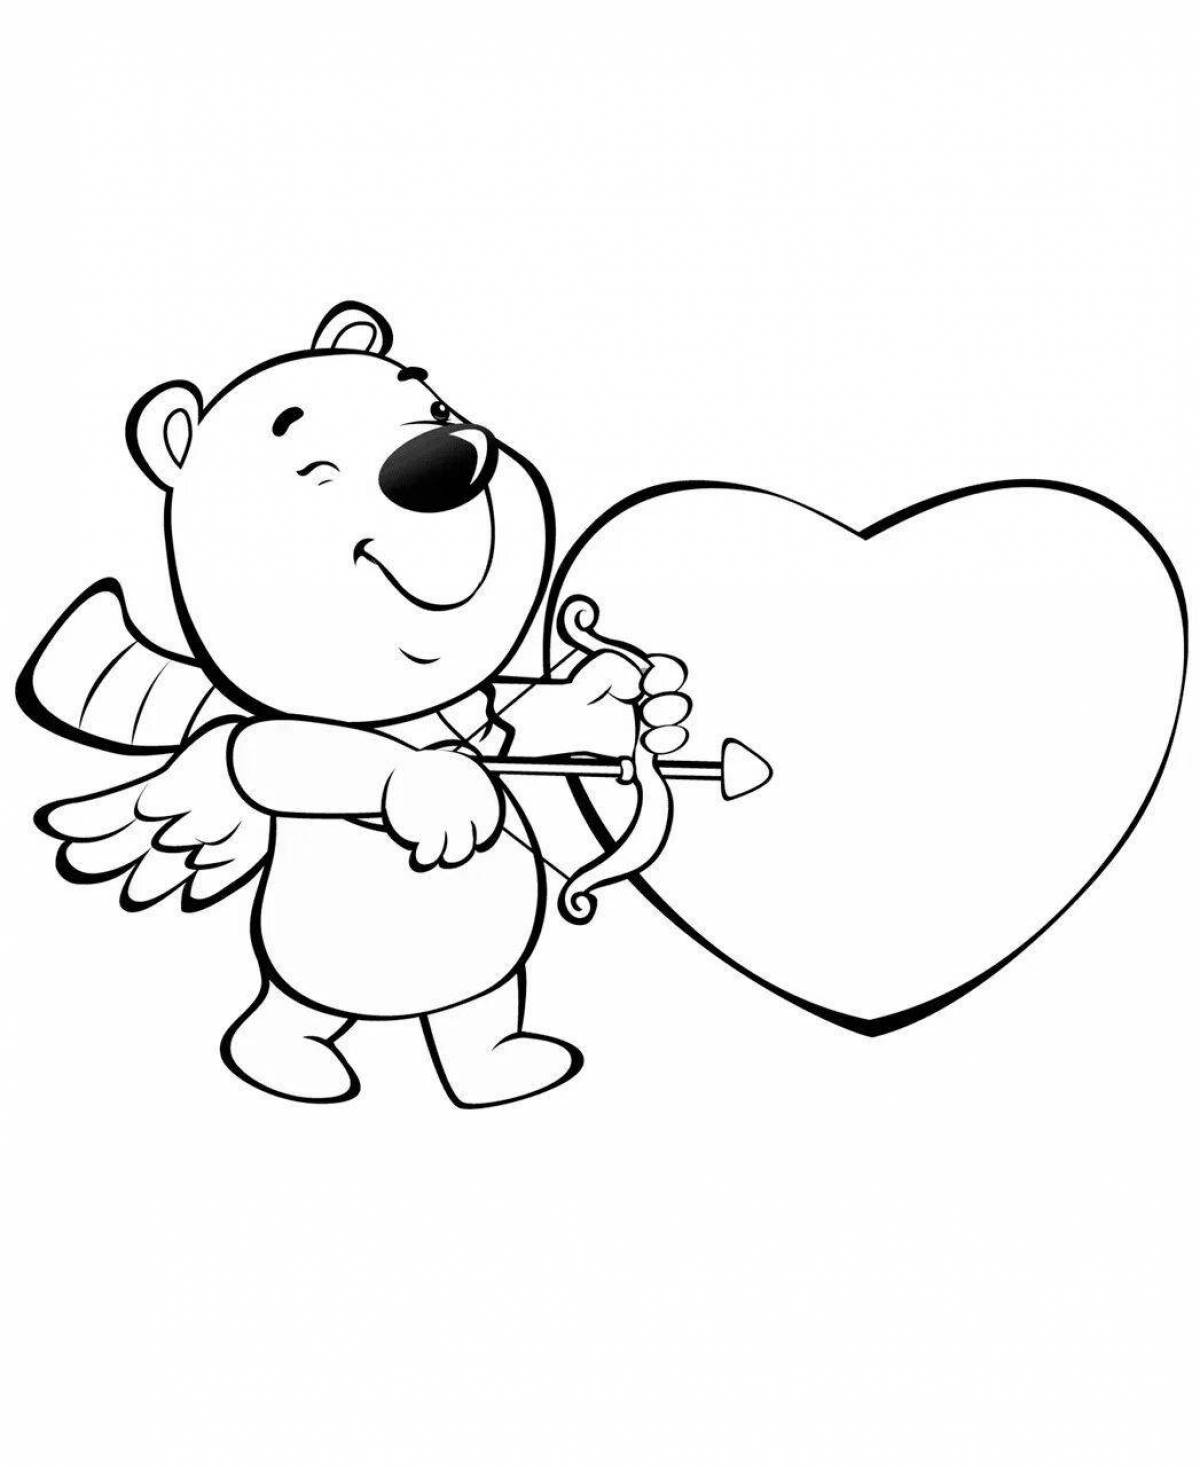 Coloring loving teddy bear with a heart